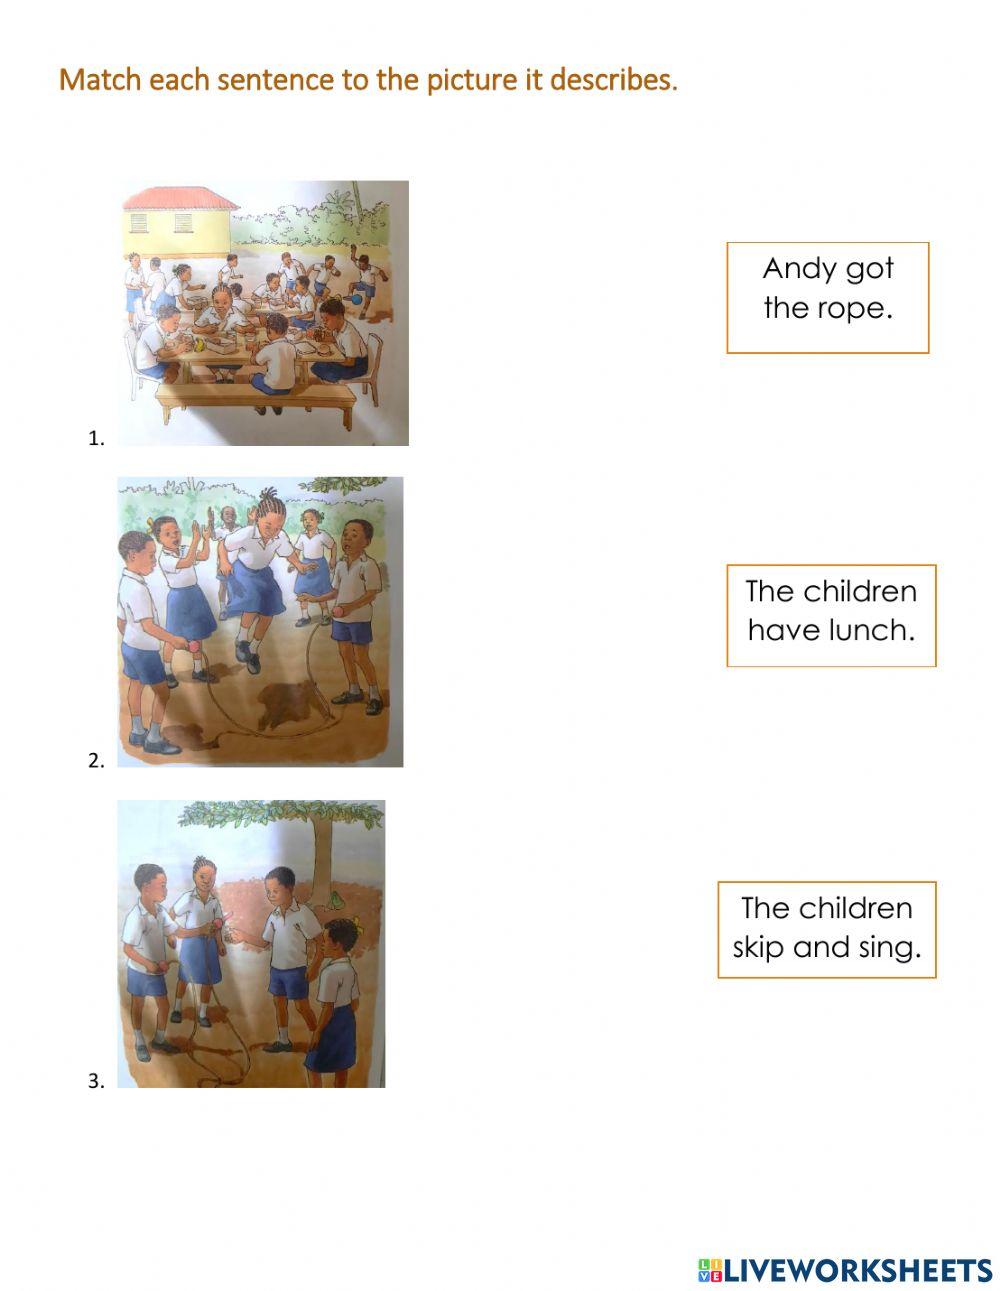 Oral Reading Practice 1 - Lunch Time